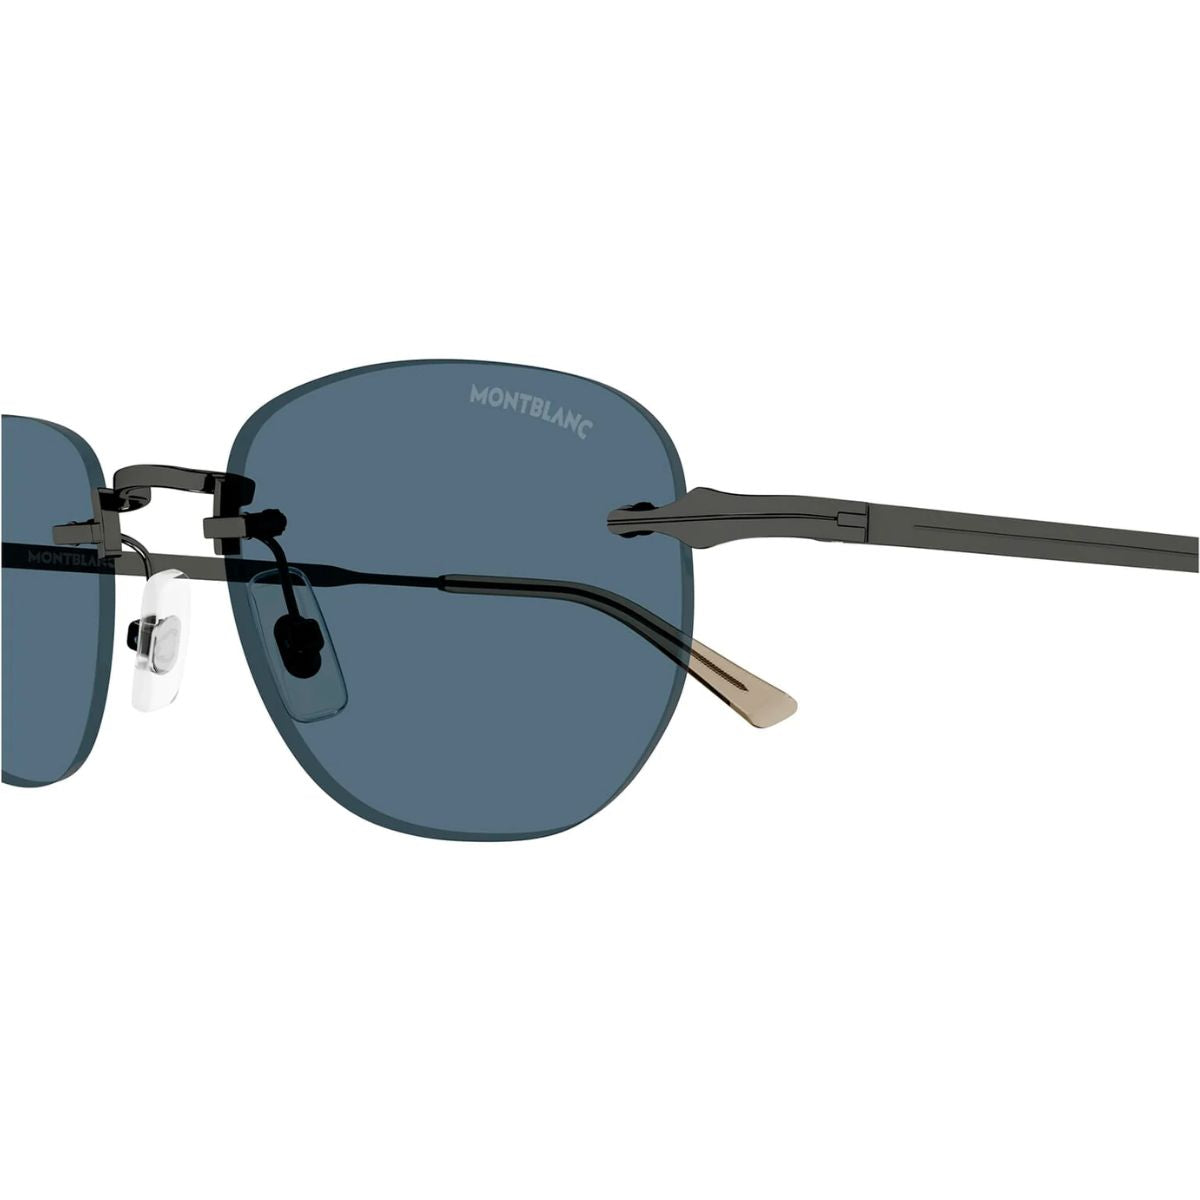 "Stylish Oval Rimless Mont Blanc Sunglasses For Mens At Optorium" 